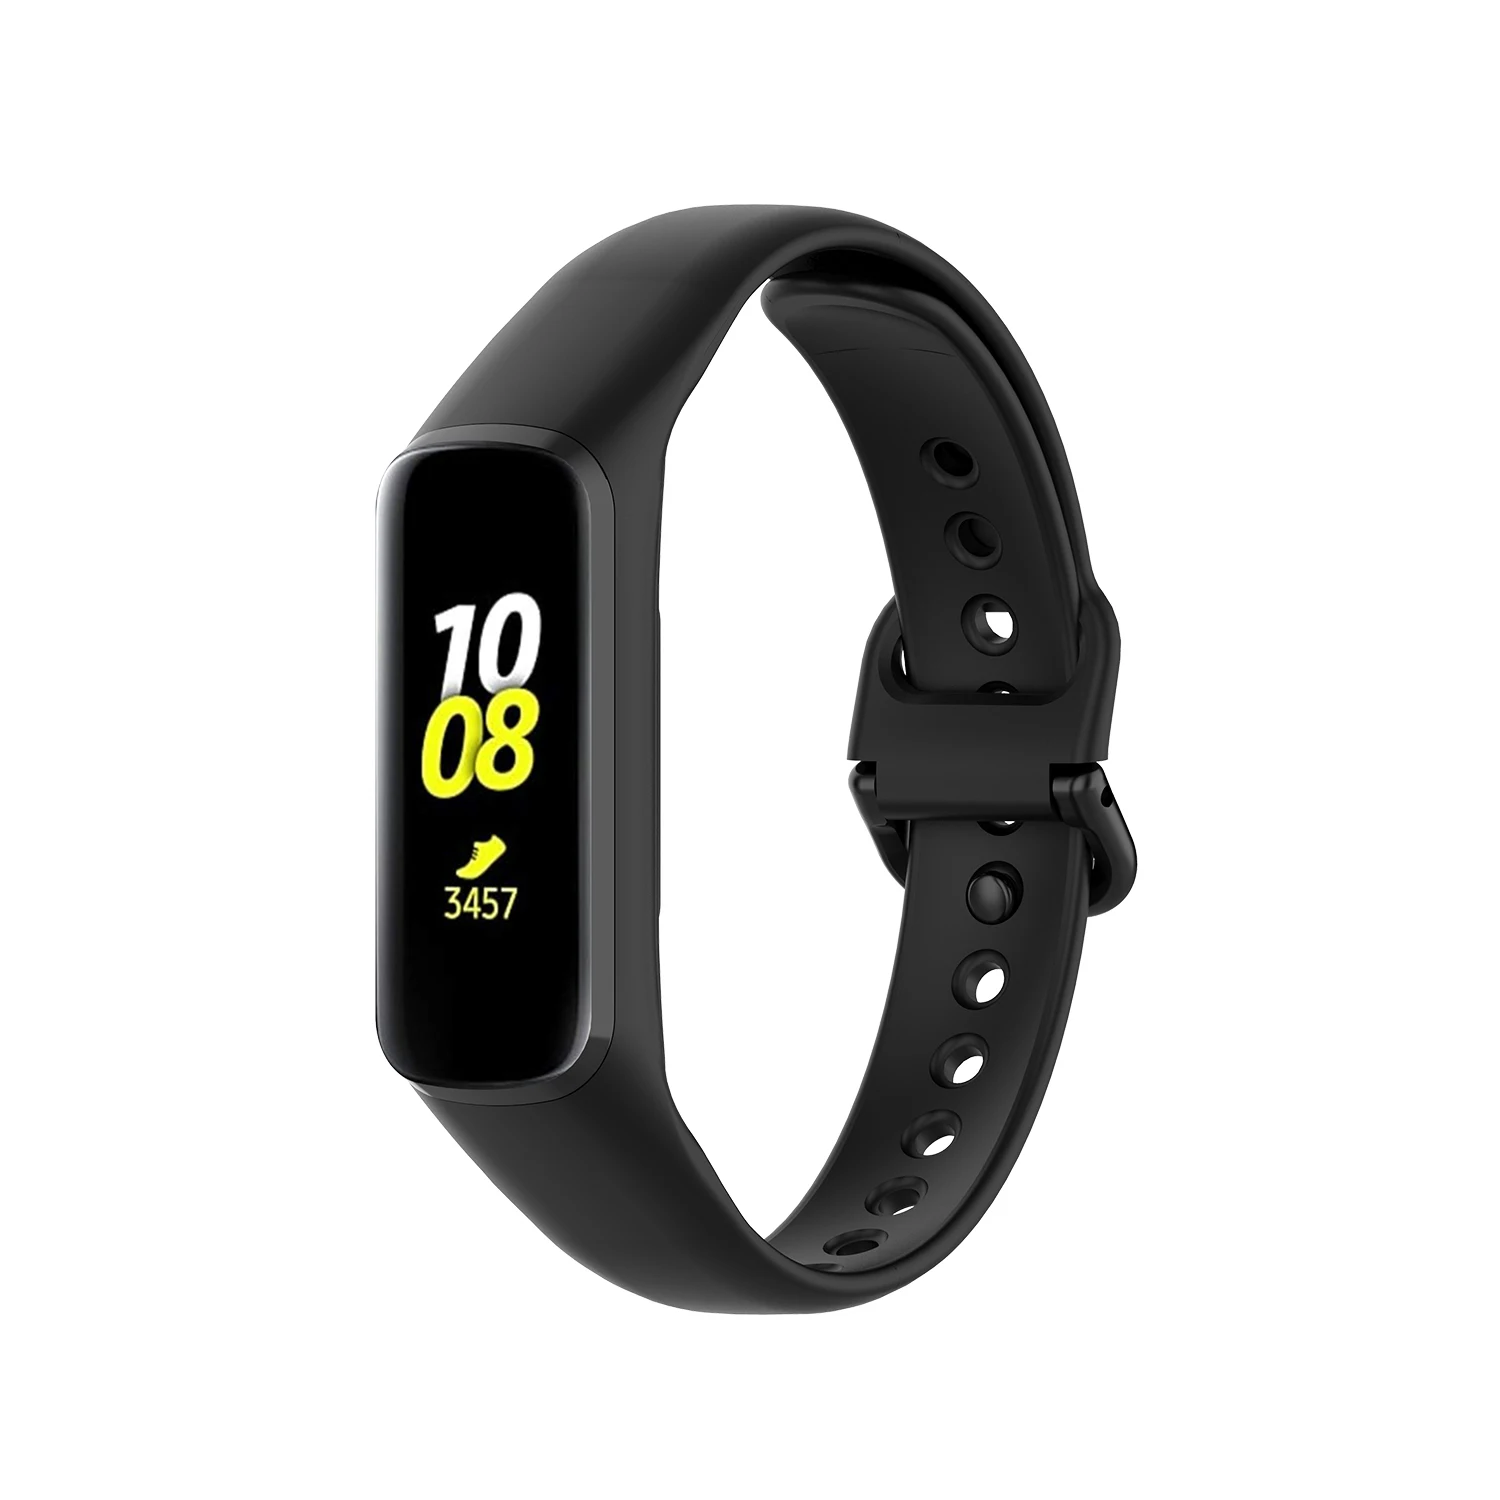 

Black Strap For Samsung Galaxy Fit2 SM-R220 Silicone Watchband Replacement bracelets Super Light Wristband Accessories